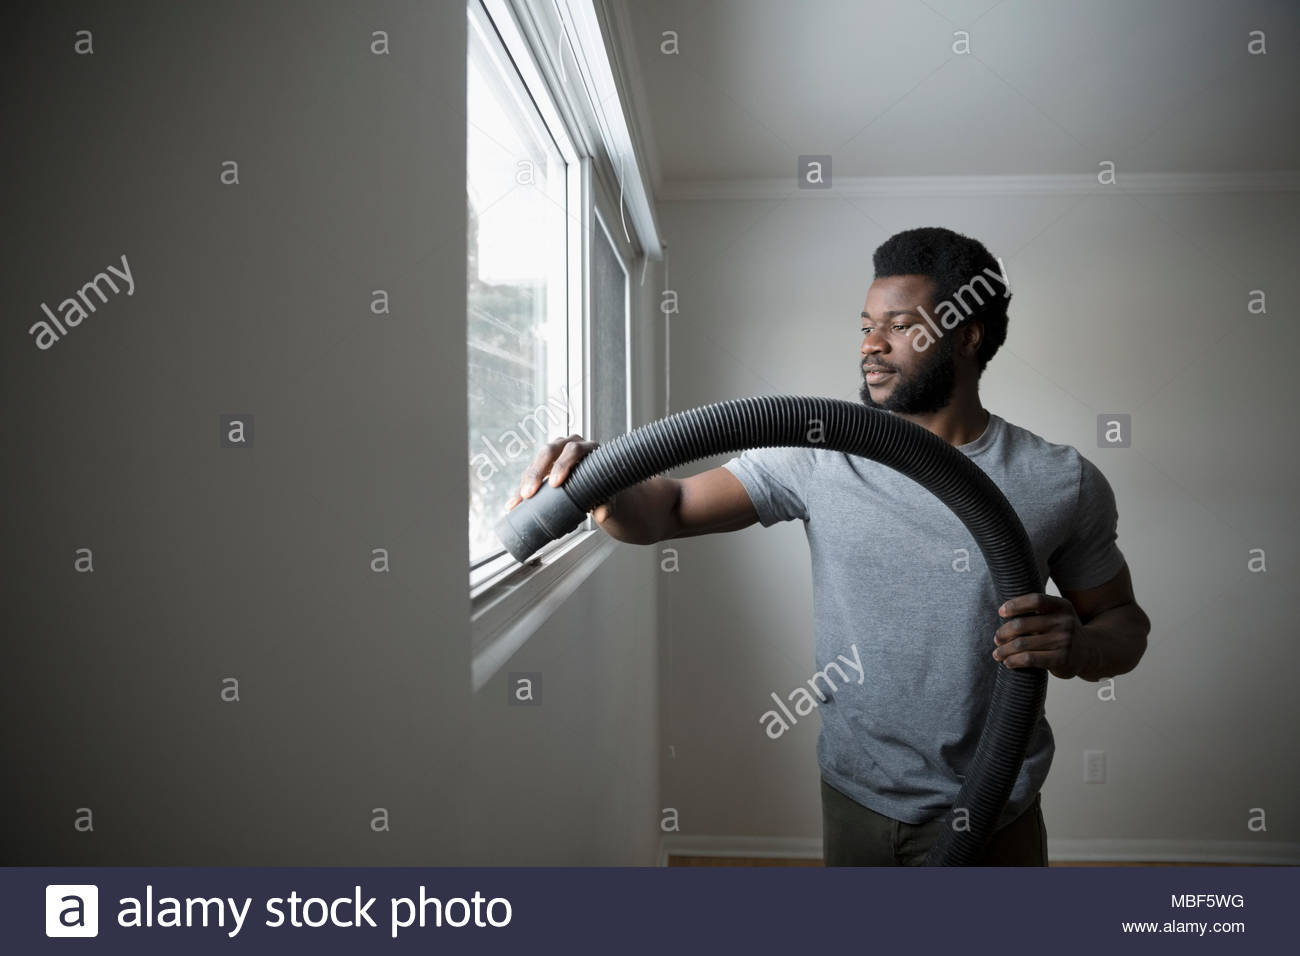 Young man moving out, cleaning and vacuuming window sill, DIY Stock Photo